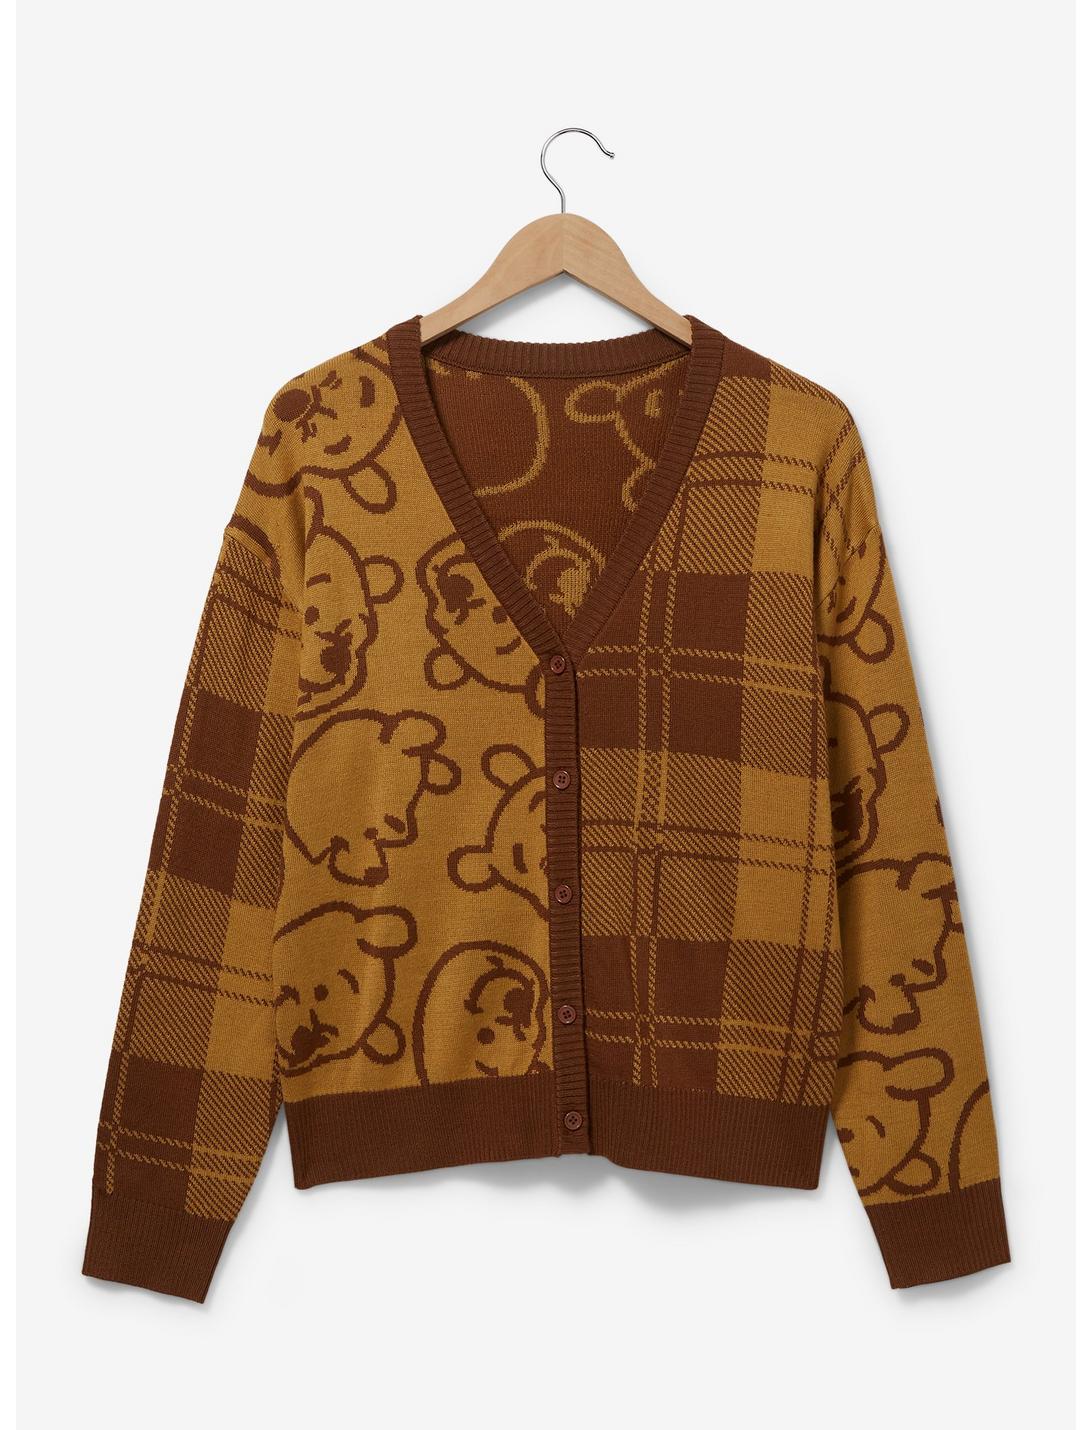 Disney Winnie the Pooh Plaid Pooh Bear Outline Women's Cardigan - BoxLunch Exclusive, MUSTARD, hi-res